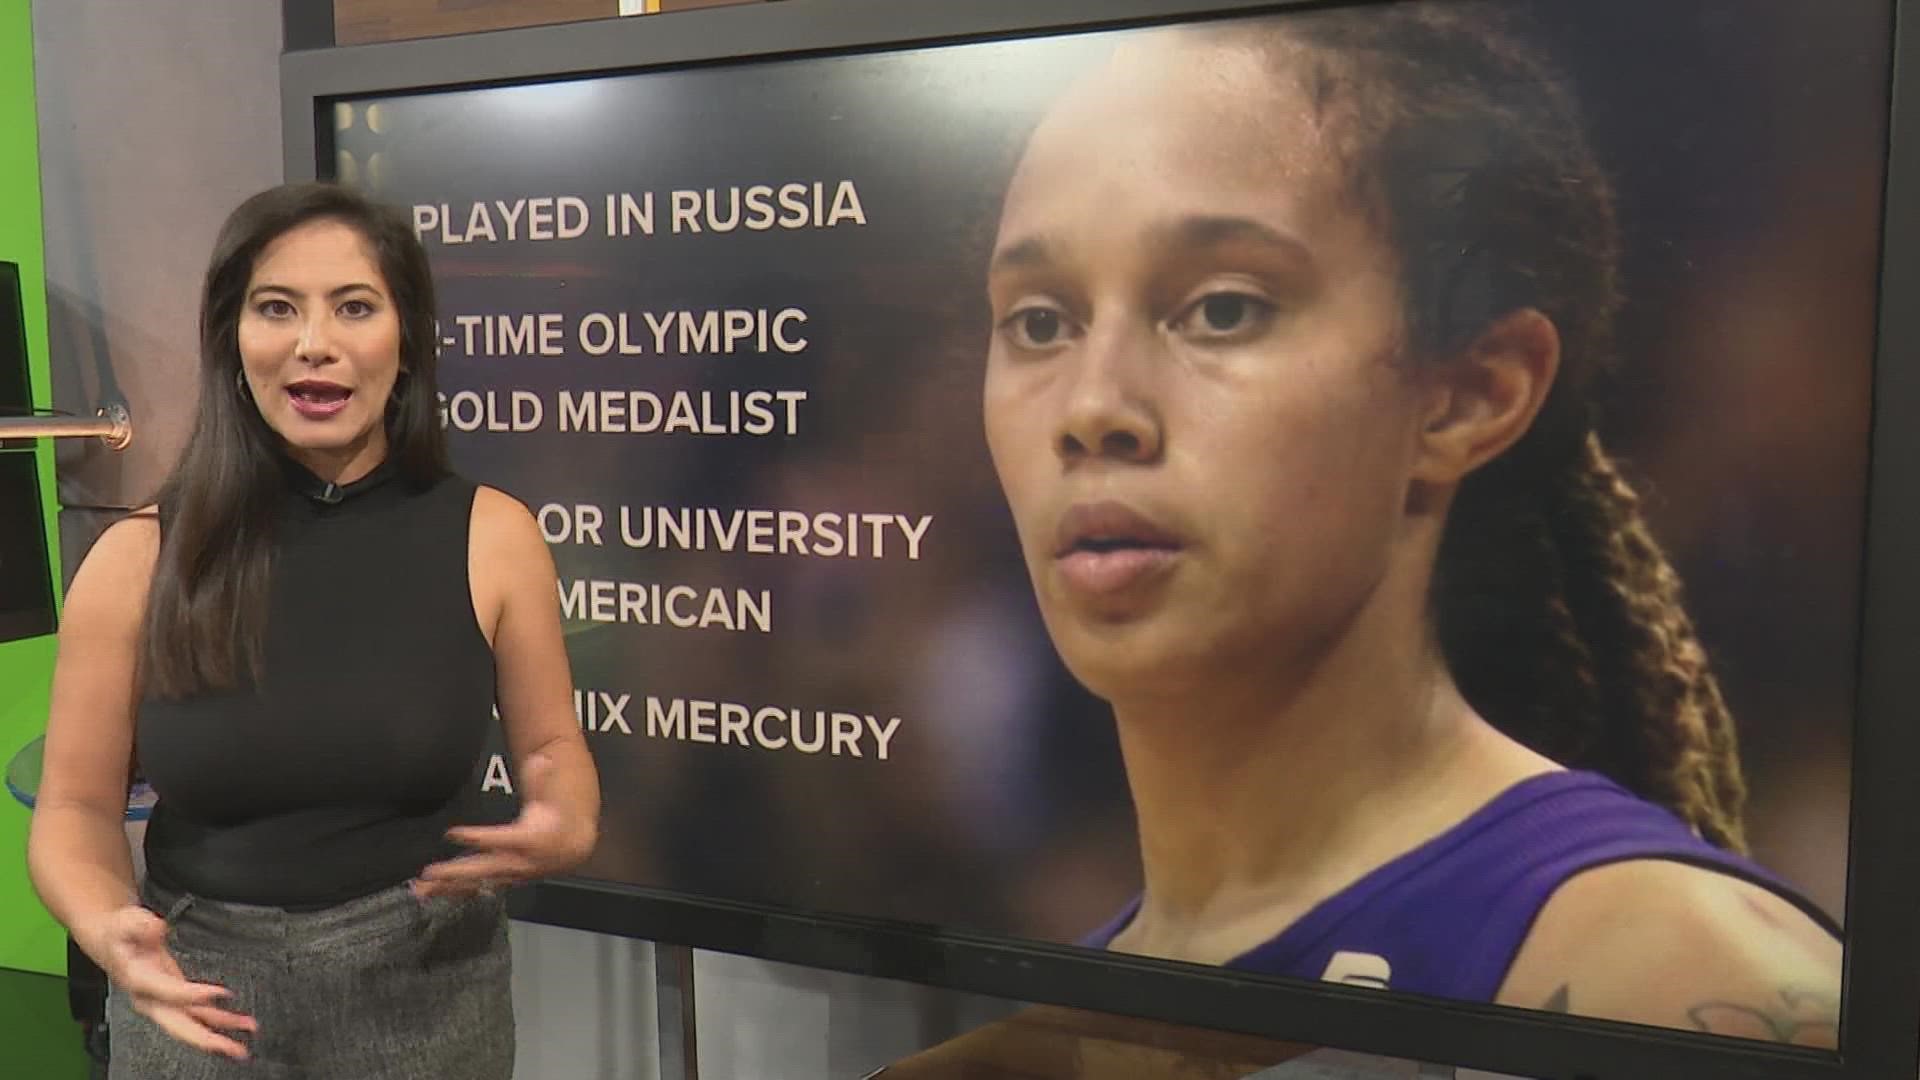 After news broke that WNBA star Brittney Griner would be coming home to the US, fellow athletes and the basketball community sent out messages of support for Griner.